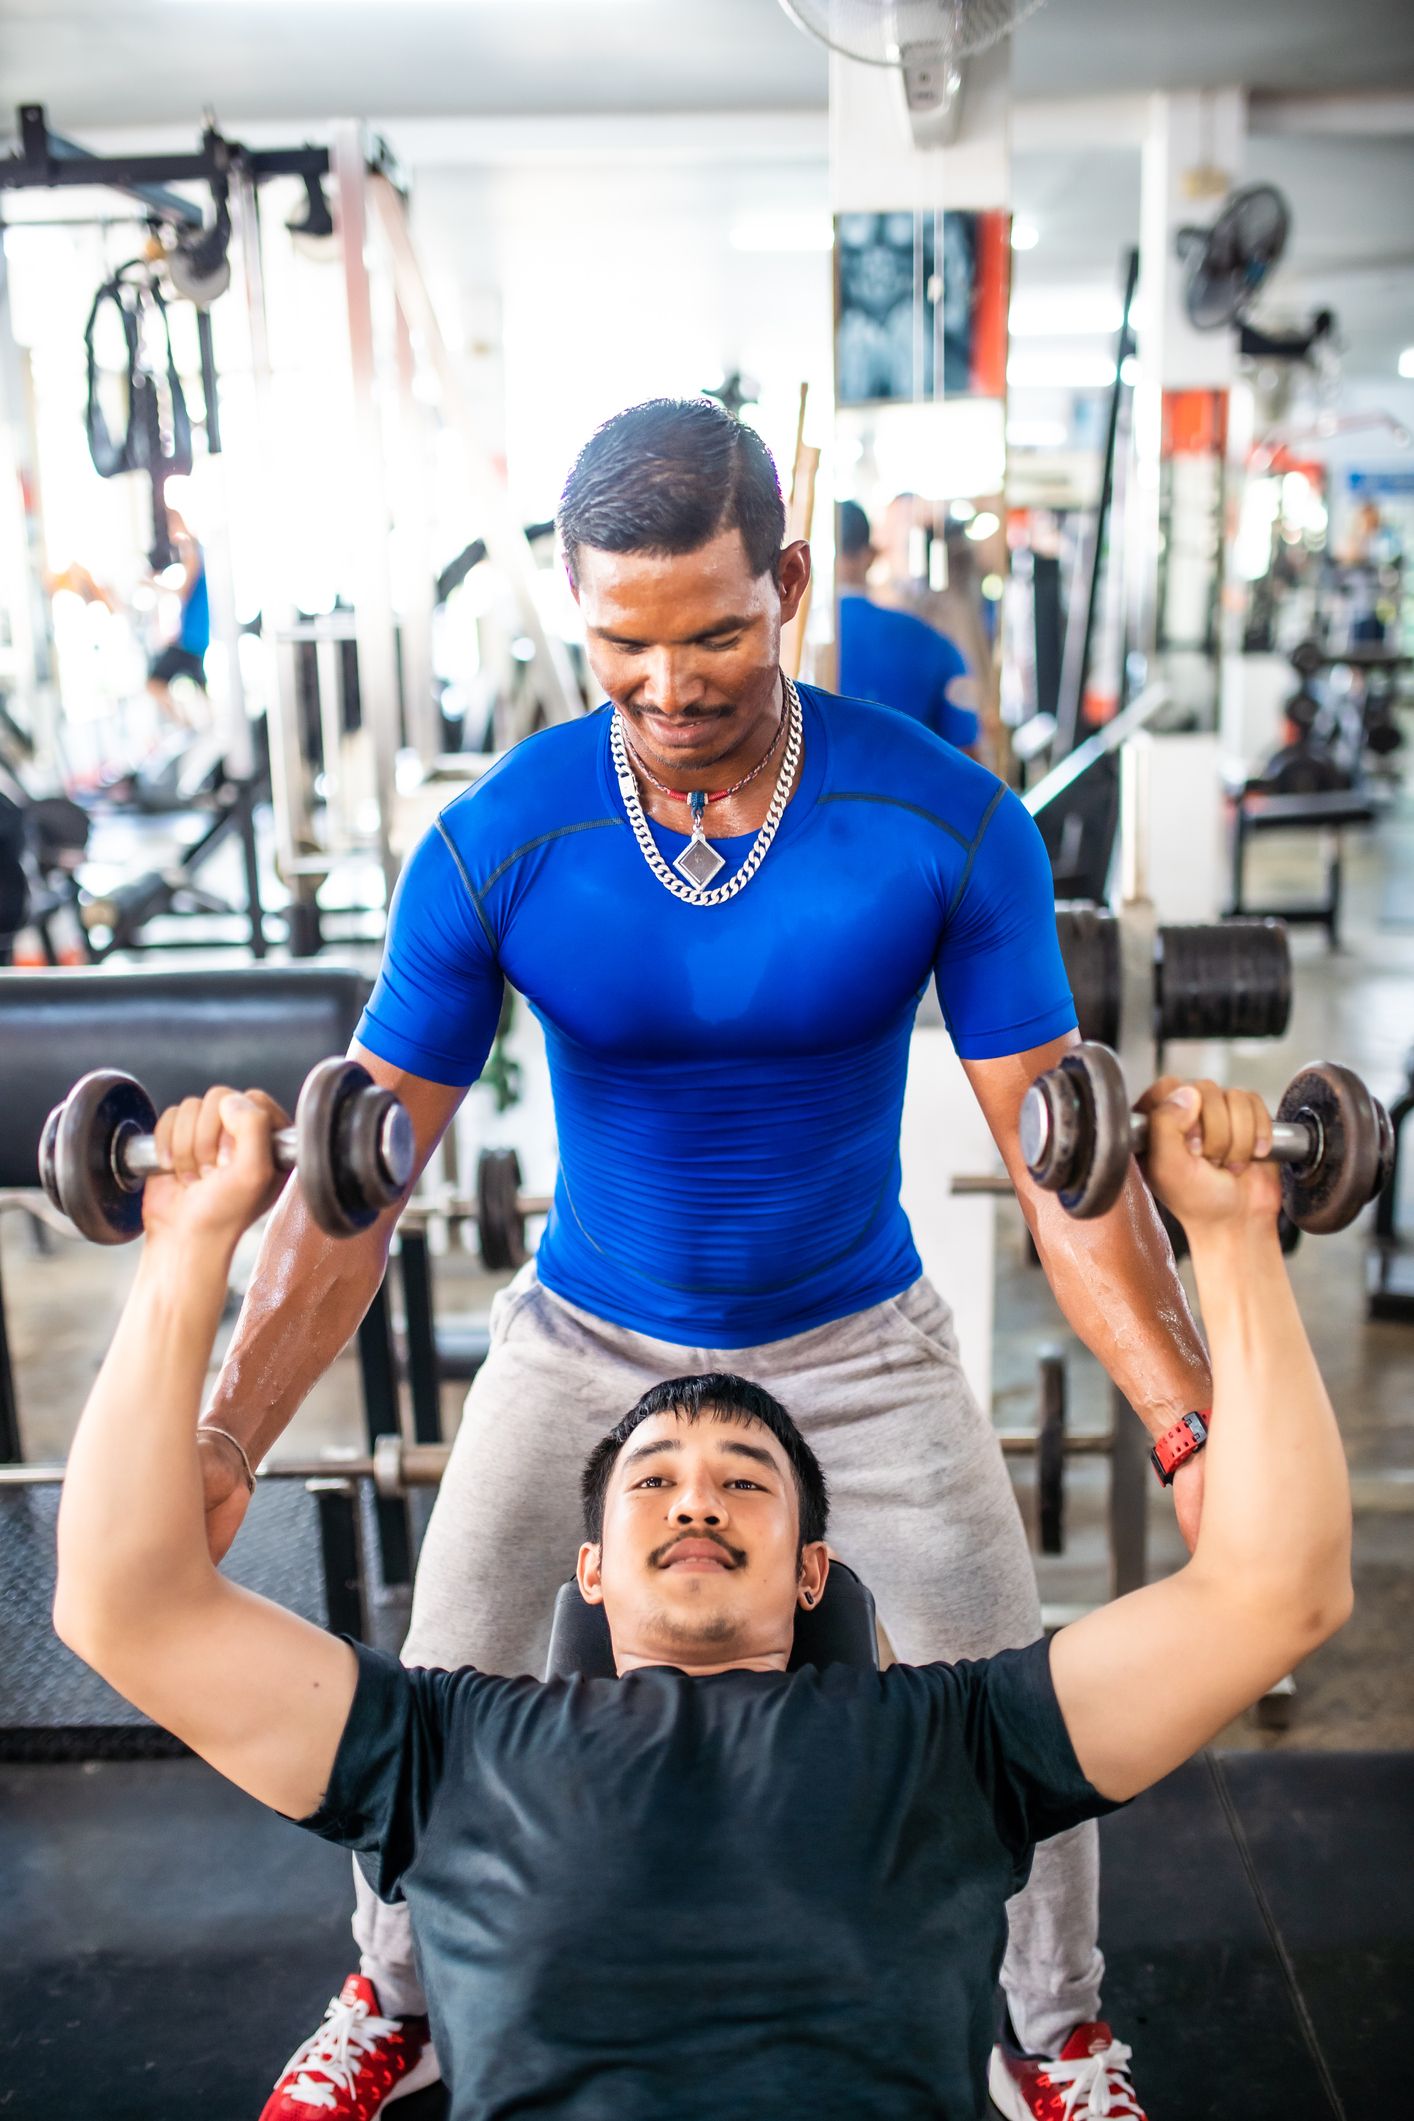 redden Aan rukken Use These Tips To Be a Perfect Gym Spotter